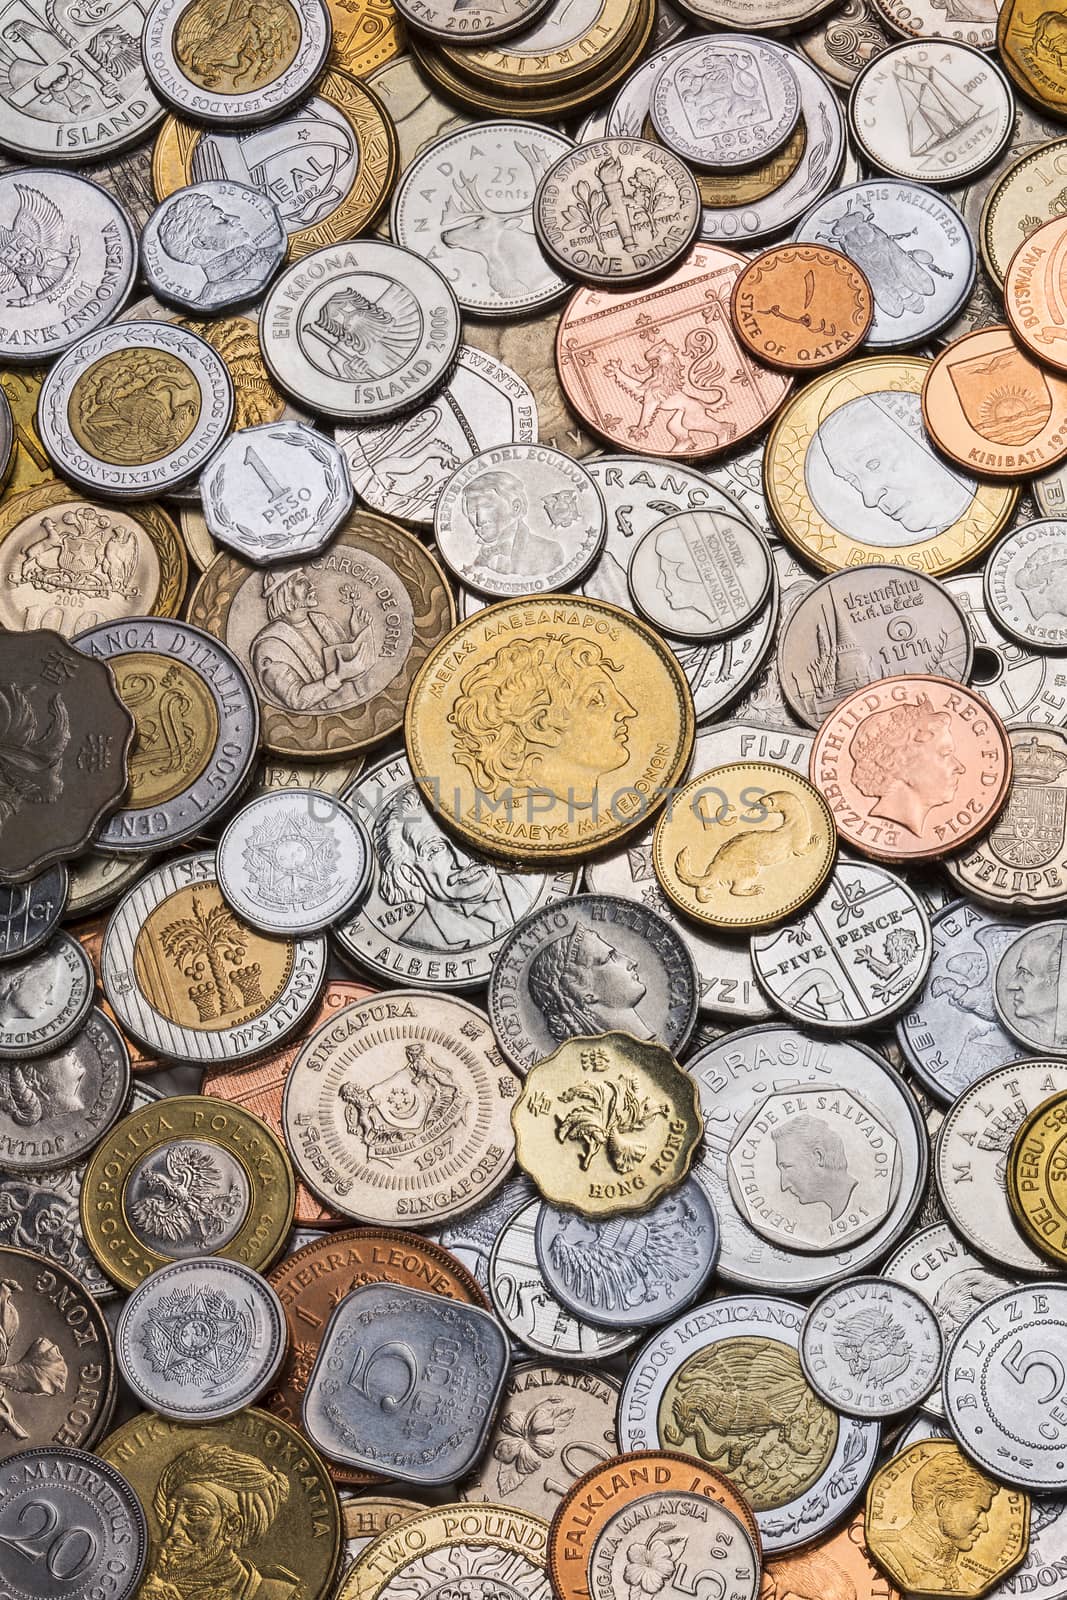 A collection of coins from around the world - International currency.